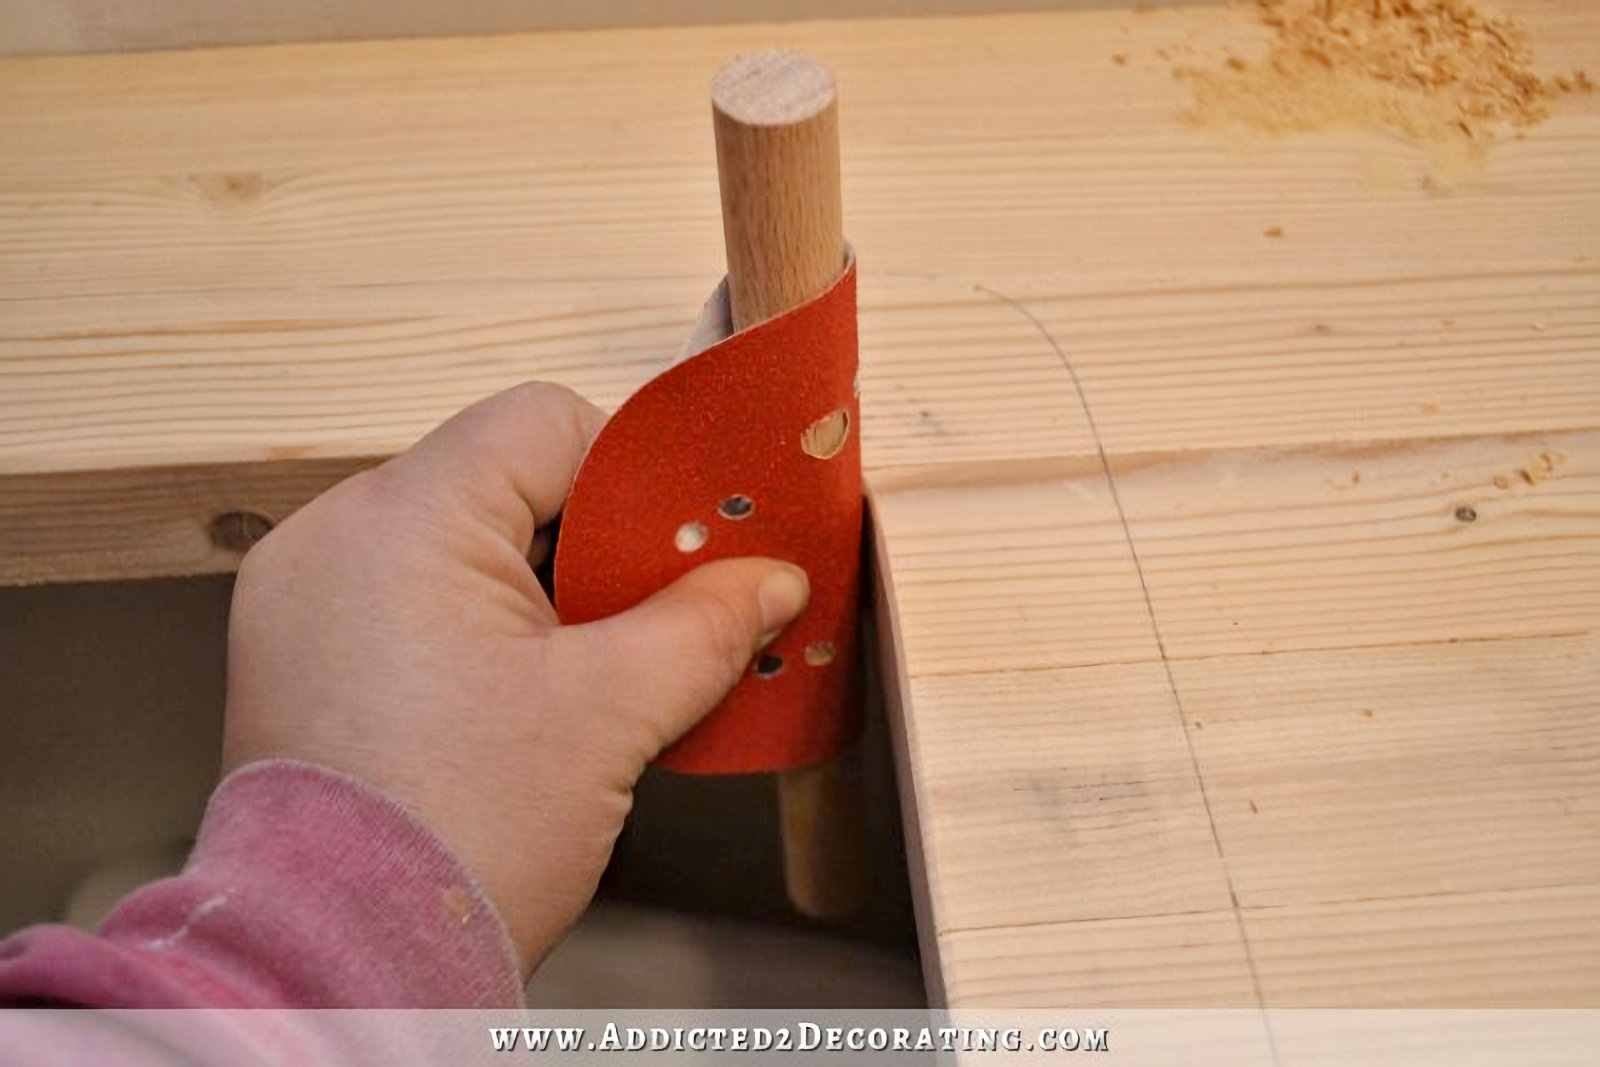 DIY butcherblock style countertop - sanding the hole cut for the undermount sink